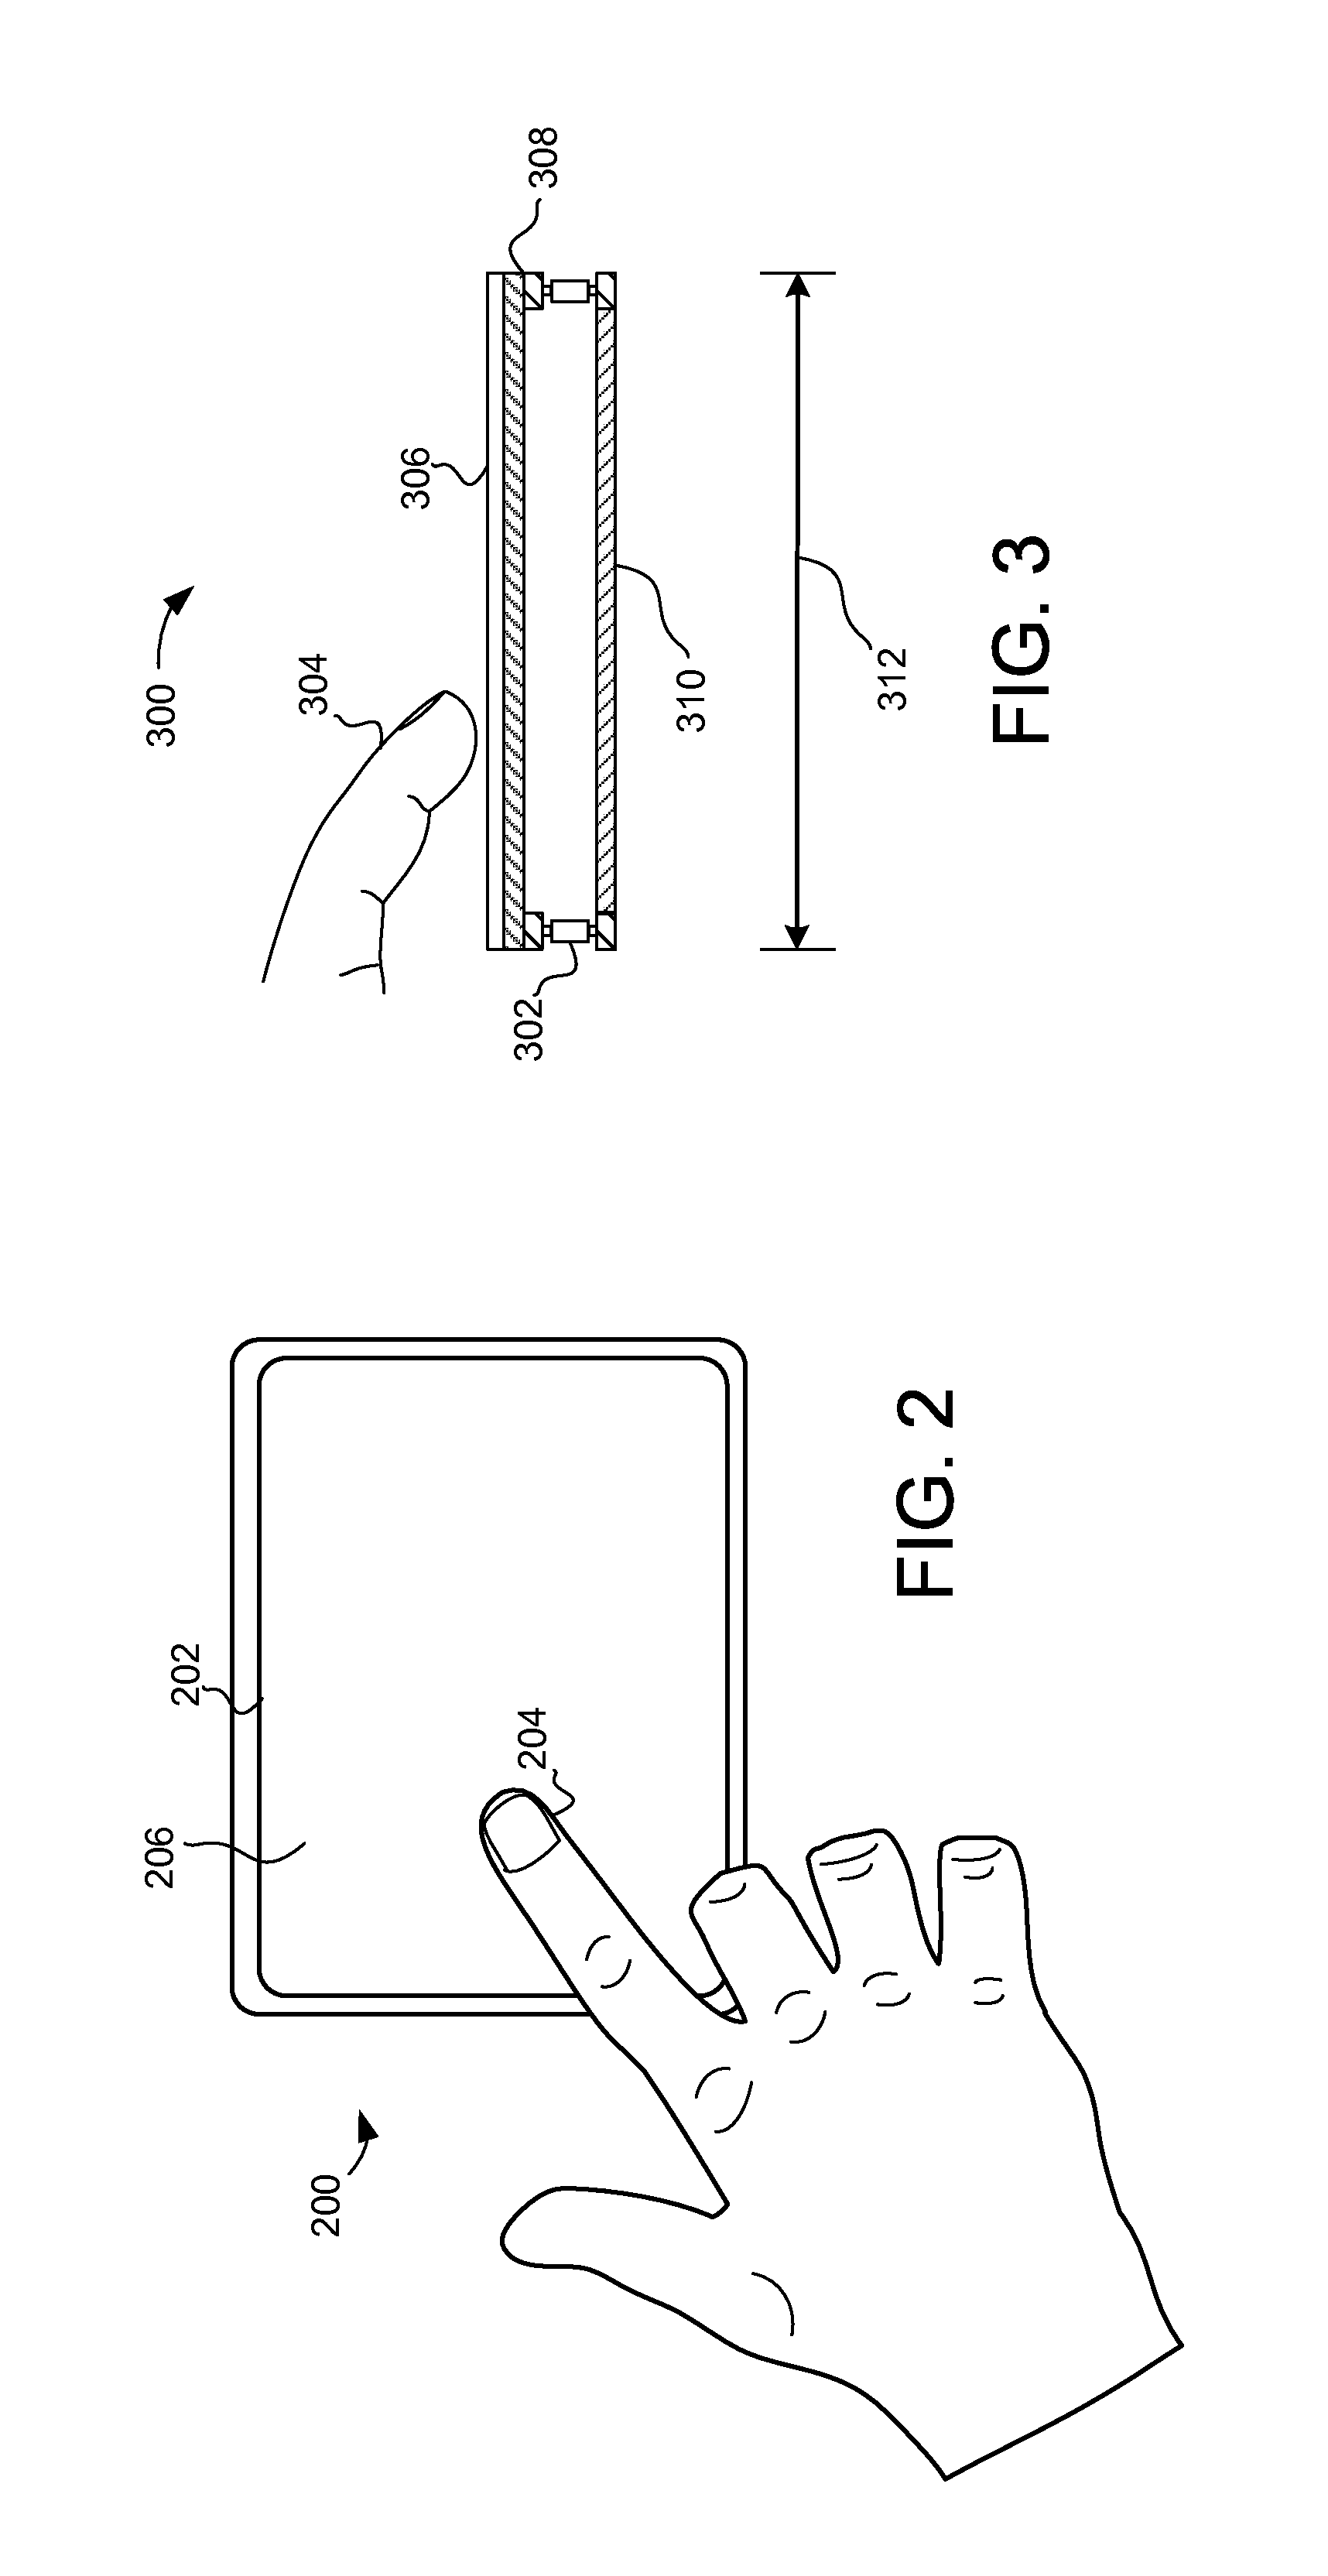 System and method for determining object information using an estimated rigid motion response